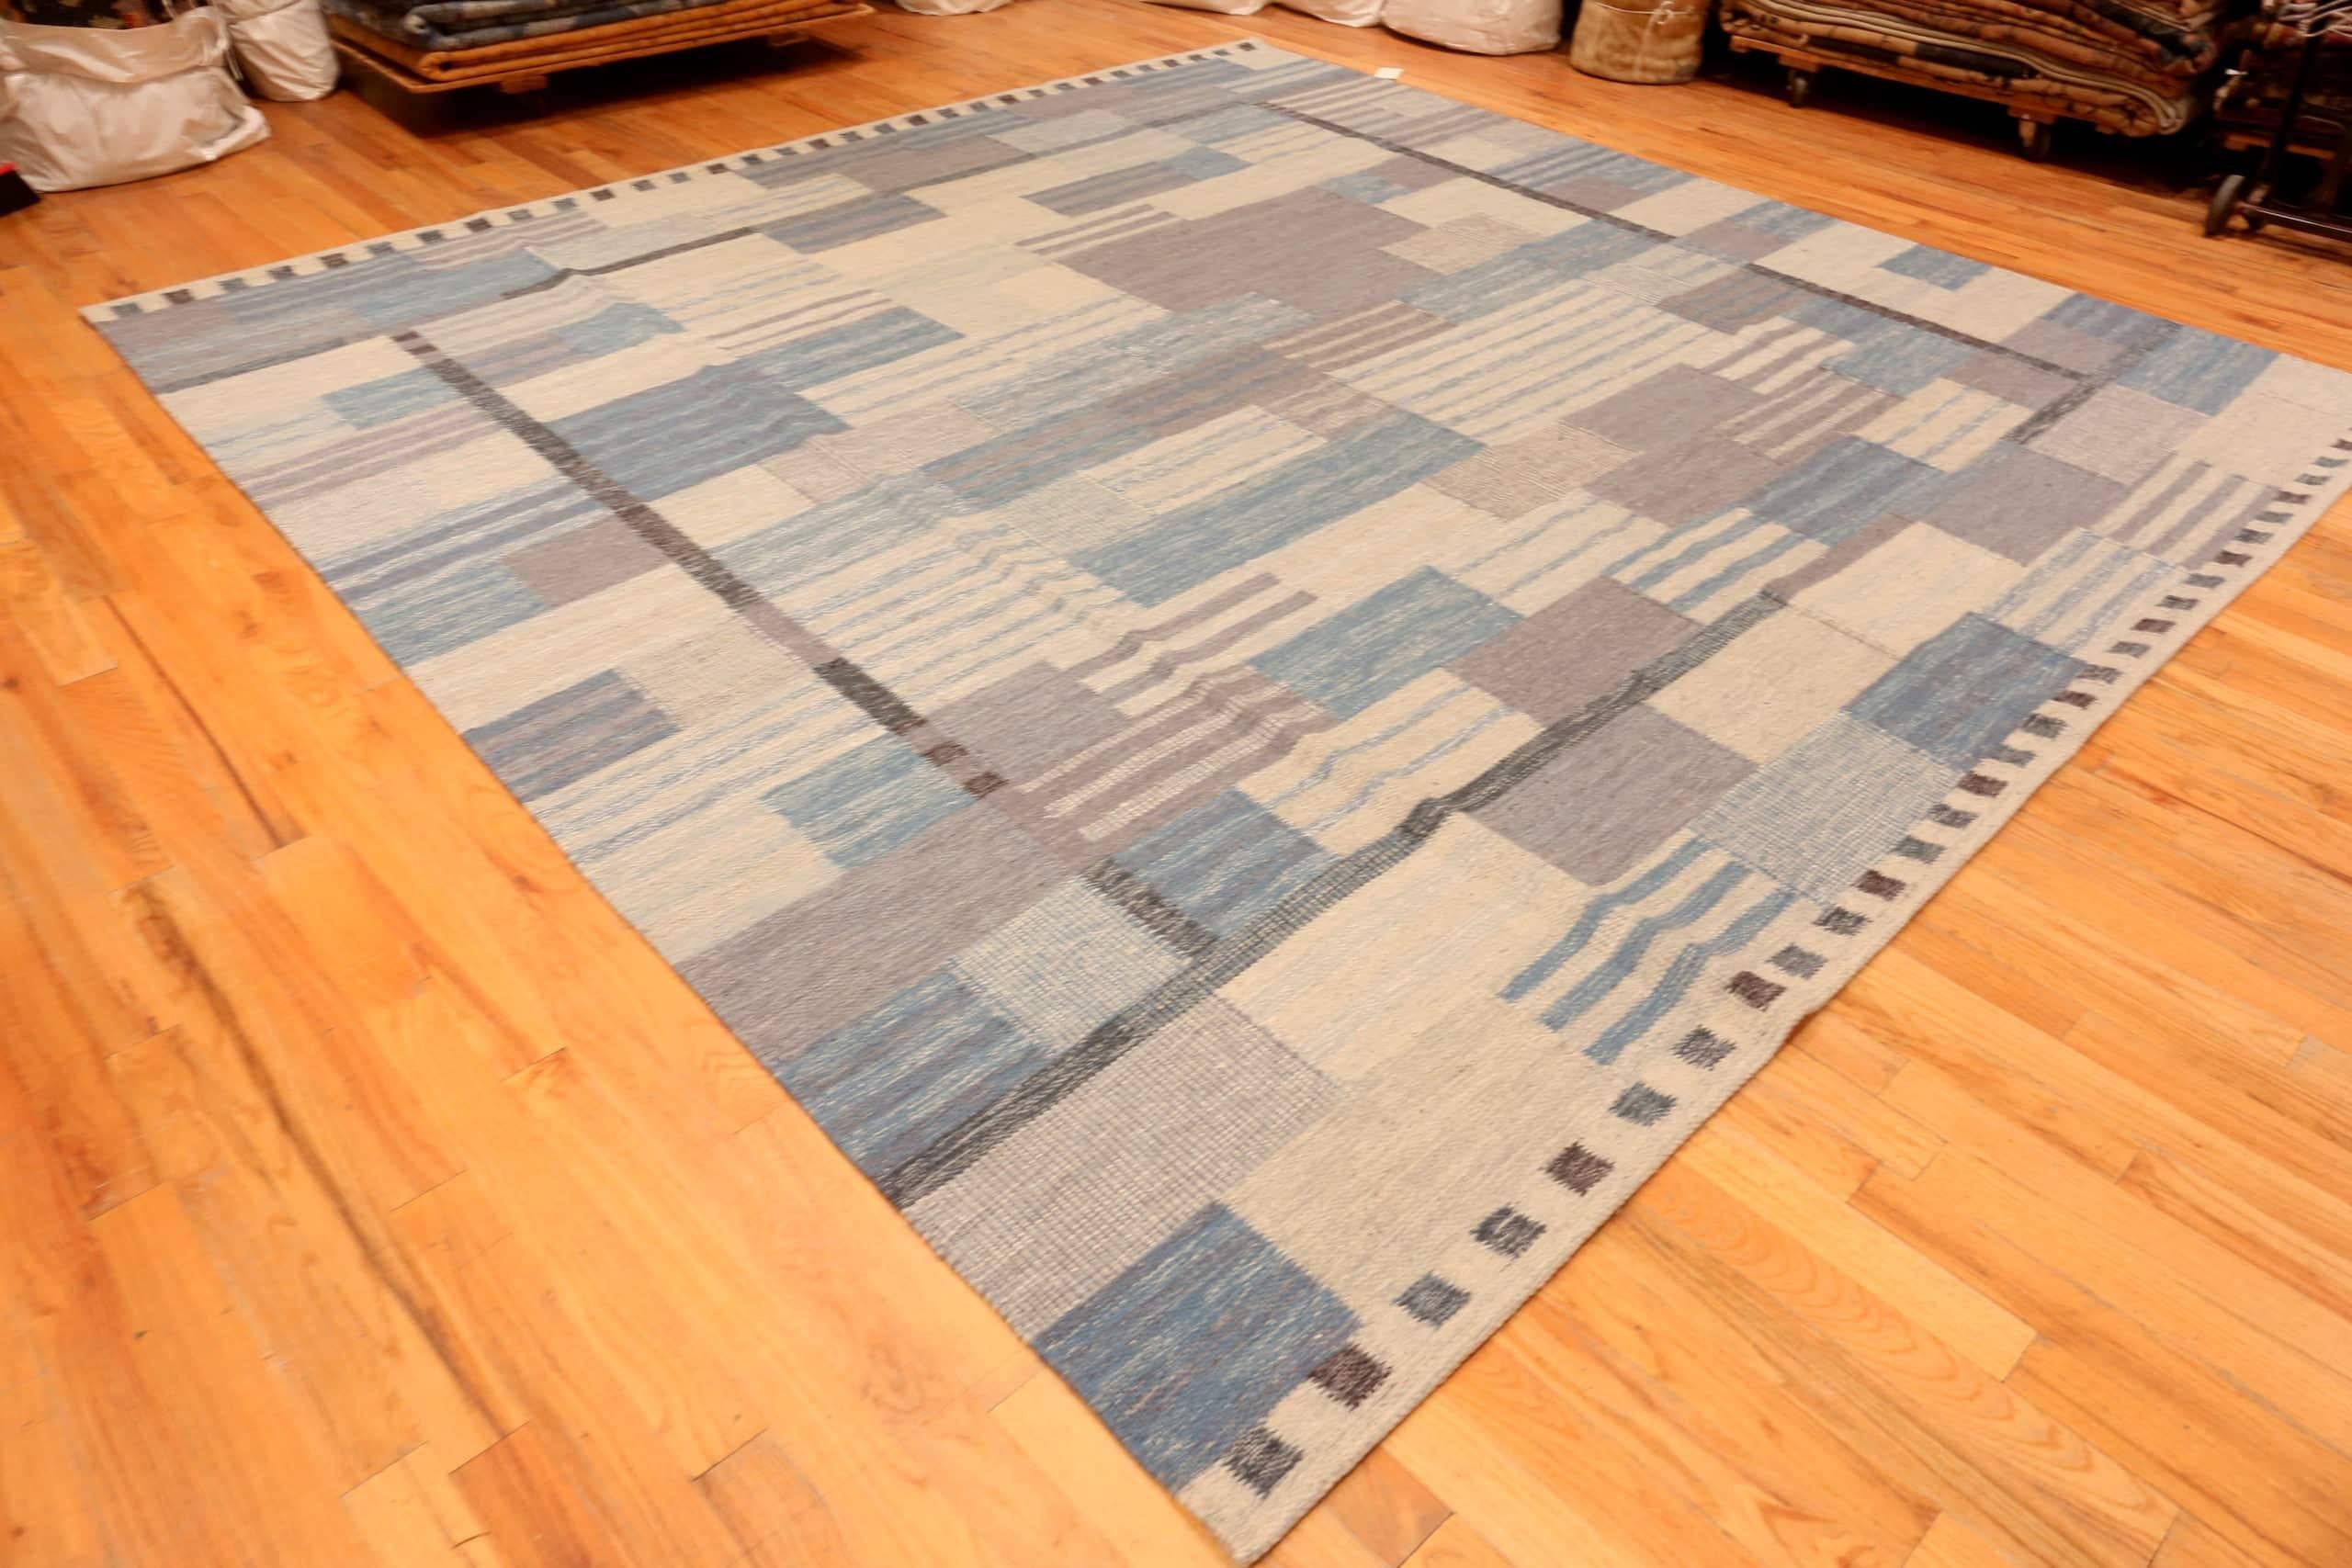 Indian Square Modern Geometric Swedish Inspired Flat Woven Area Rug. 12 ft x 12 ft 1 in